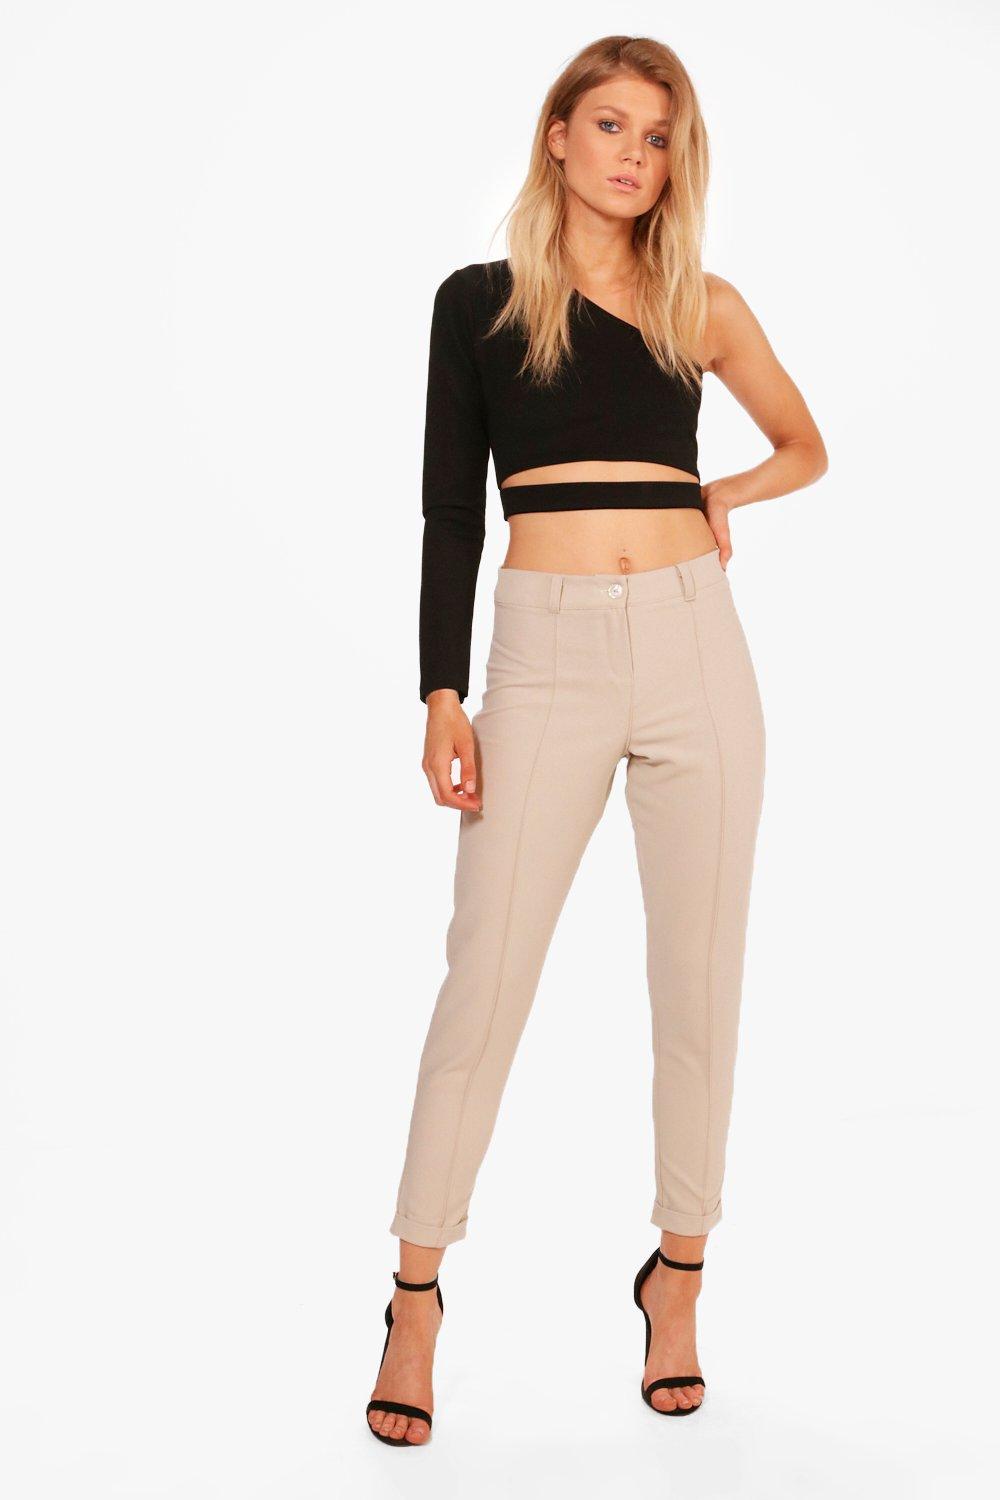 Boohoo Womens Petite Caitlin Turn Up Tailored Woven Trousers | eBay